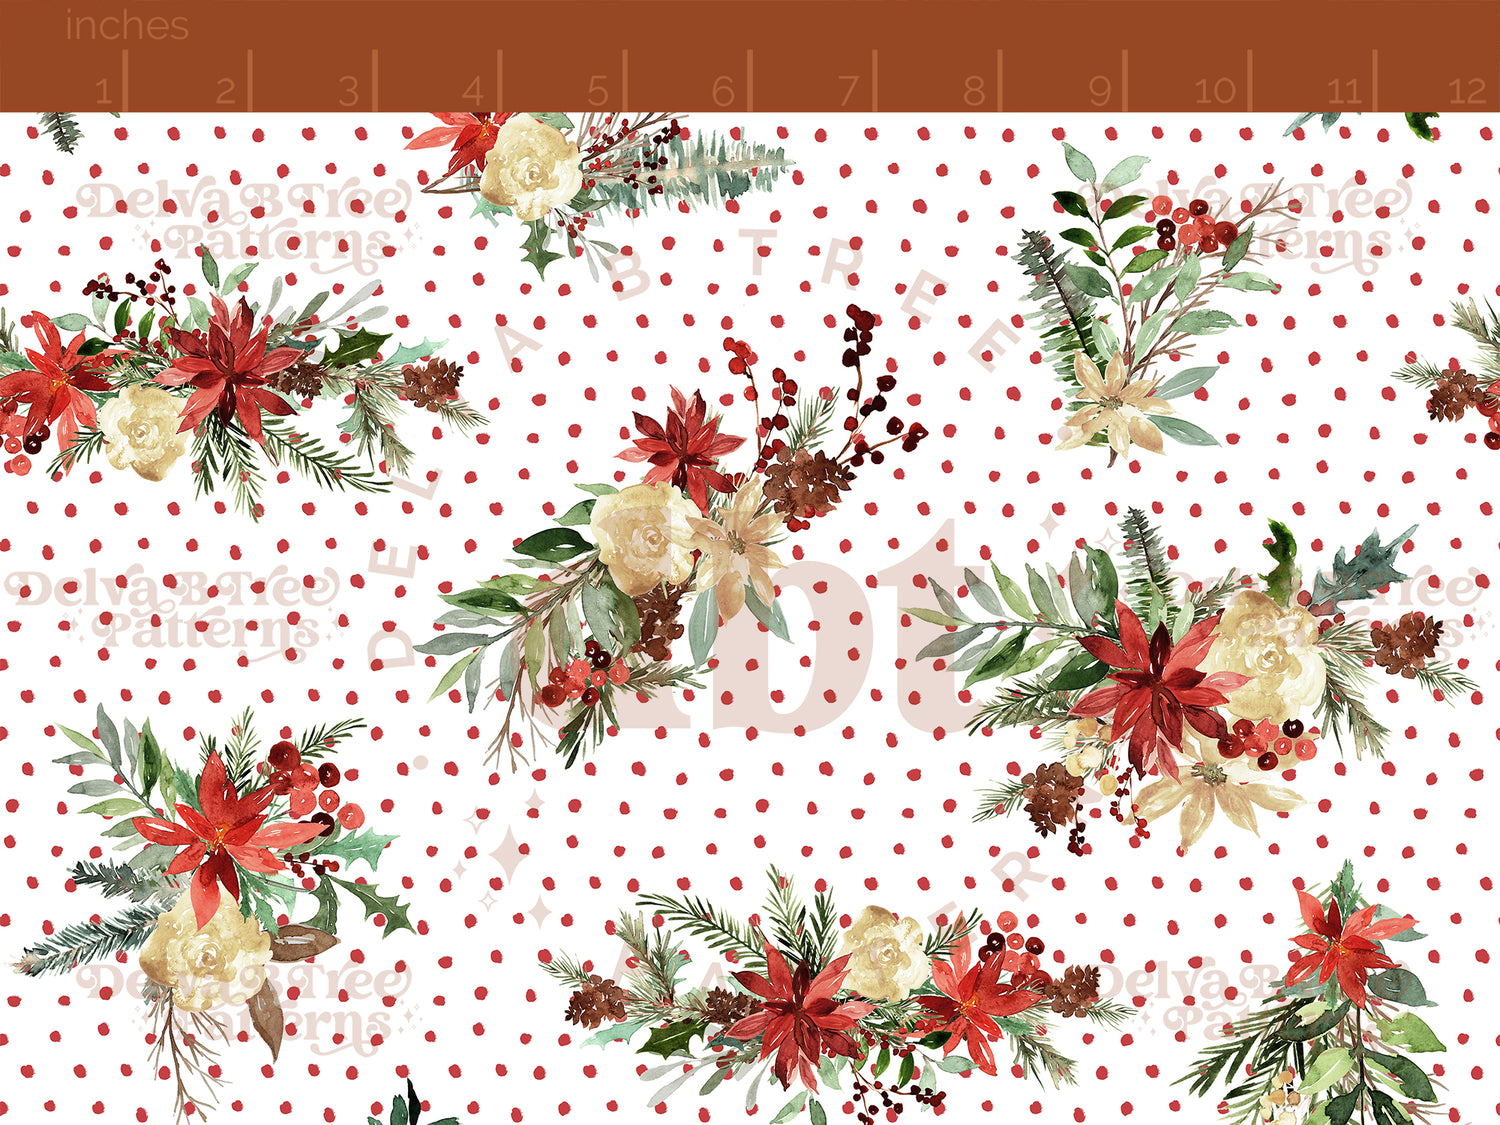 Tossed red watercolor poinsettias, off white flowers, pinecones, holly leaves, mistletoe and winter berries on red polka dots seamless pattern scale, digital file for small shops that make handmade products in small batches.